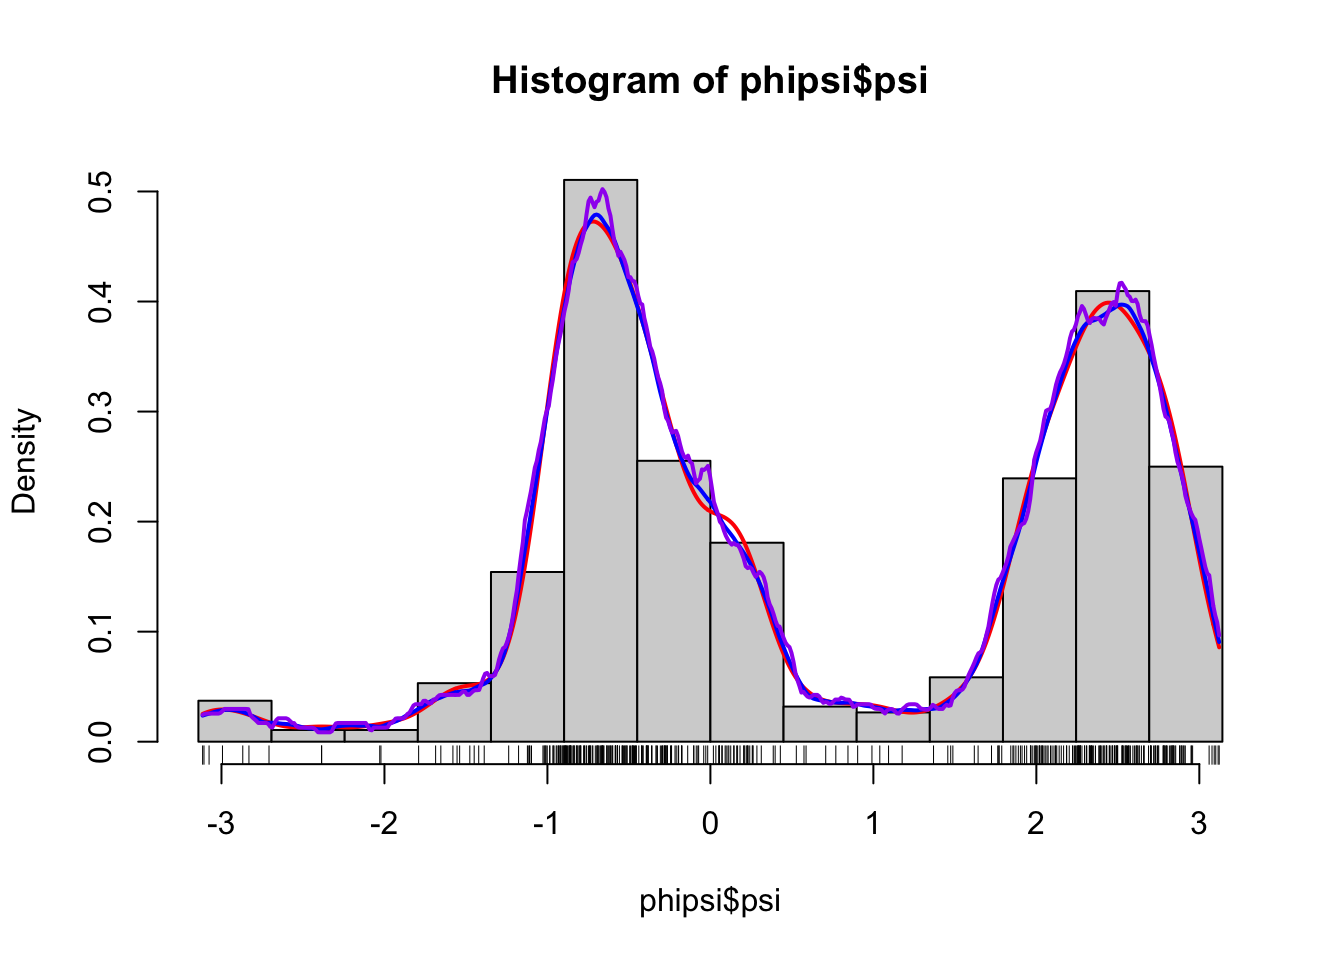 Histograms and various density estimates for the \(\psi\)-angles. The colors indicate different choices of bandwidth adjustments using the otherwise default bandwidth selection (left) and different choices of kernels using Sheather-Jones bandwidth selection (right).